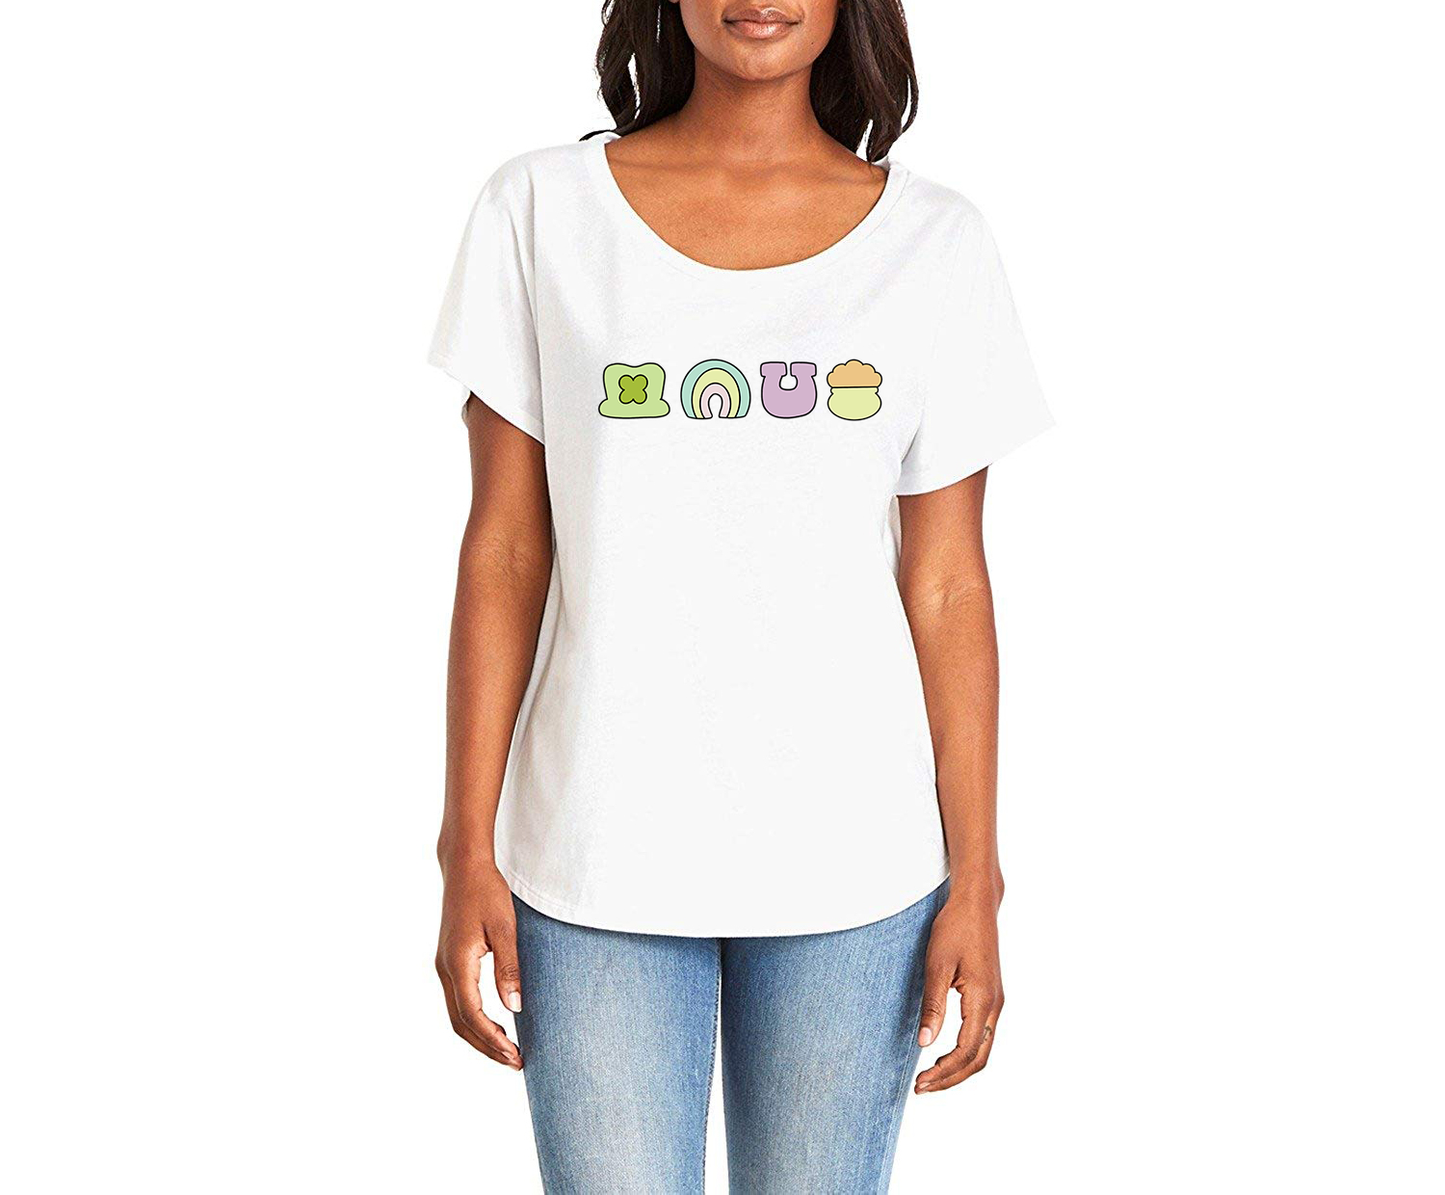 Lucky Charms Ladies Tee Shirt - In Grey & White